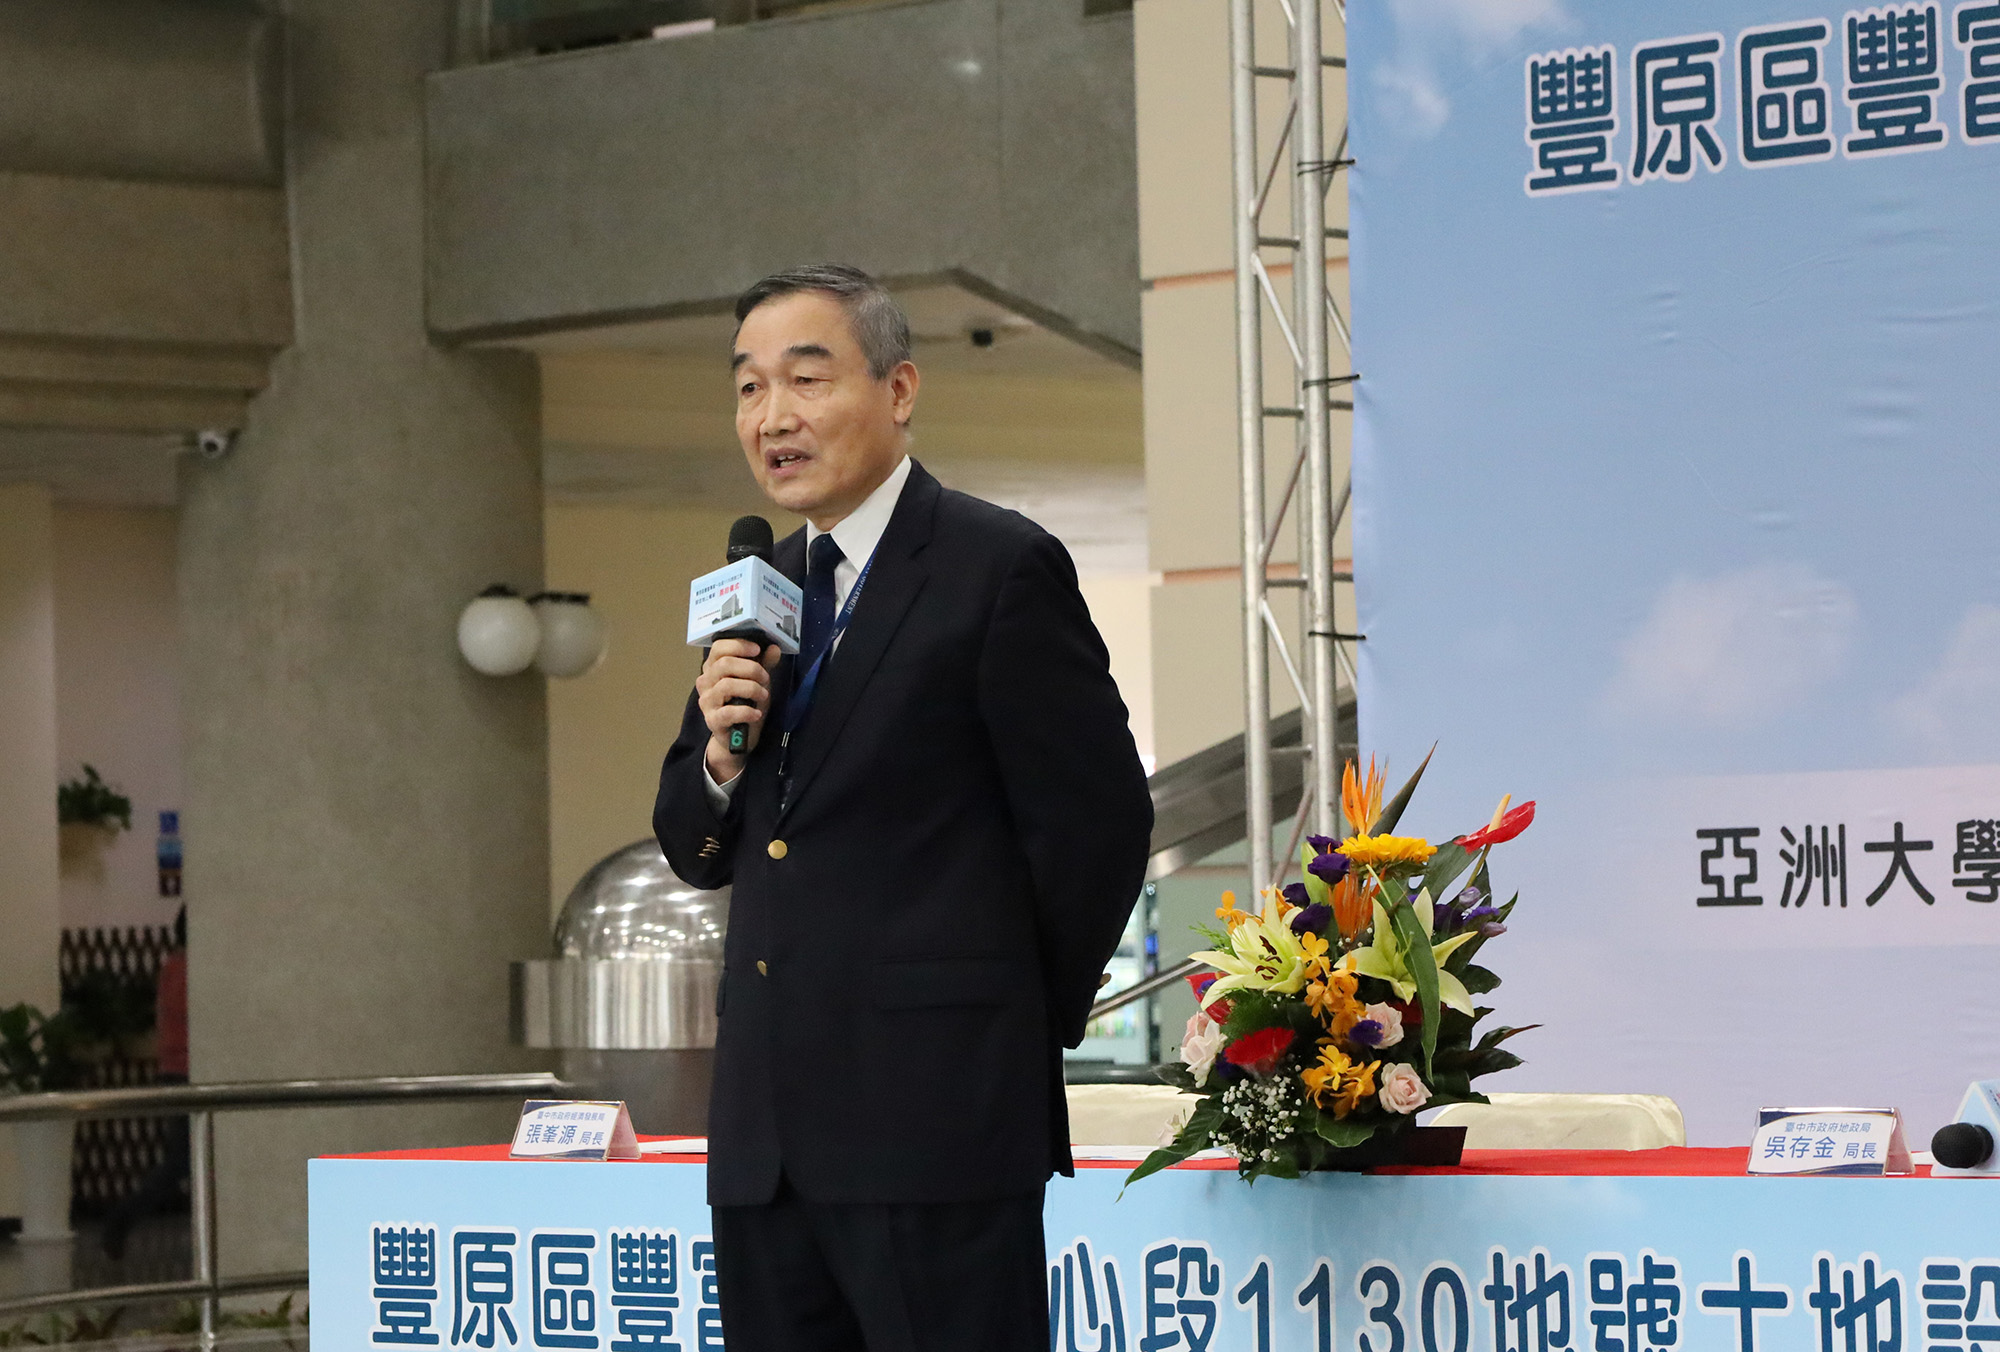 Deputy Mayor Guo-Rong Huang of Taichung City Government expressed that based on Asia University's excellent performance in establishing a university and hospital in Wufeng, he believes that the "Fengfu Project" will undoubtedly be very successful.